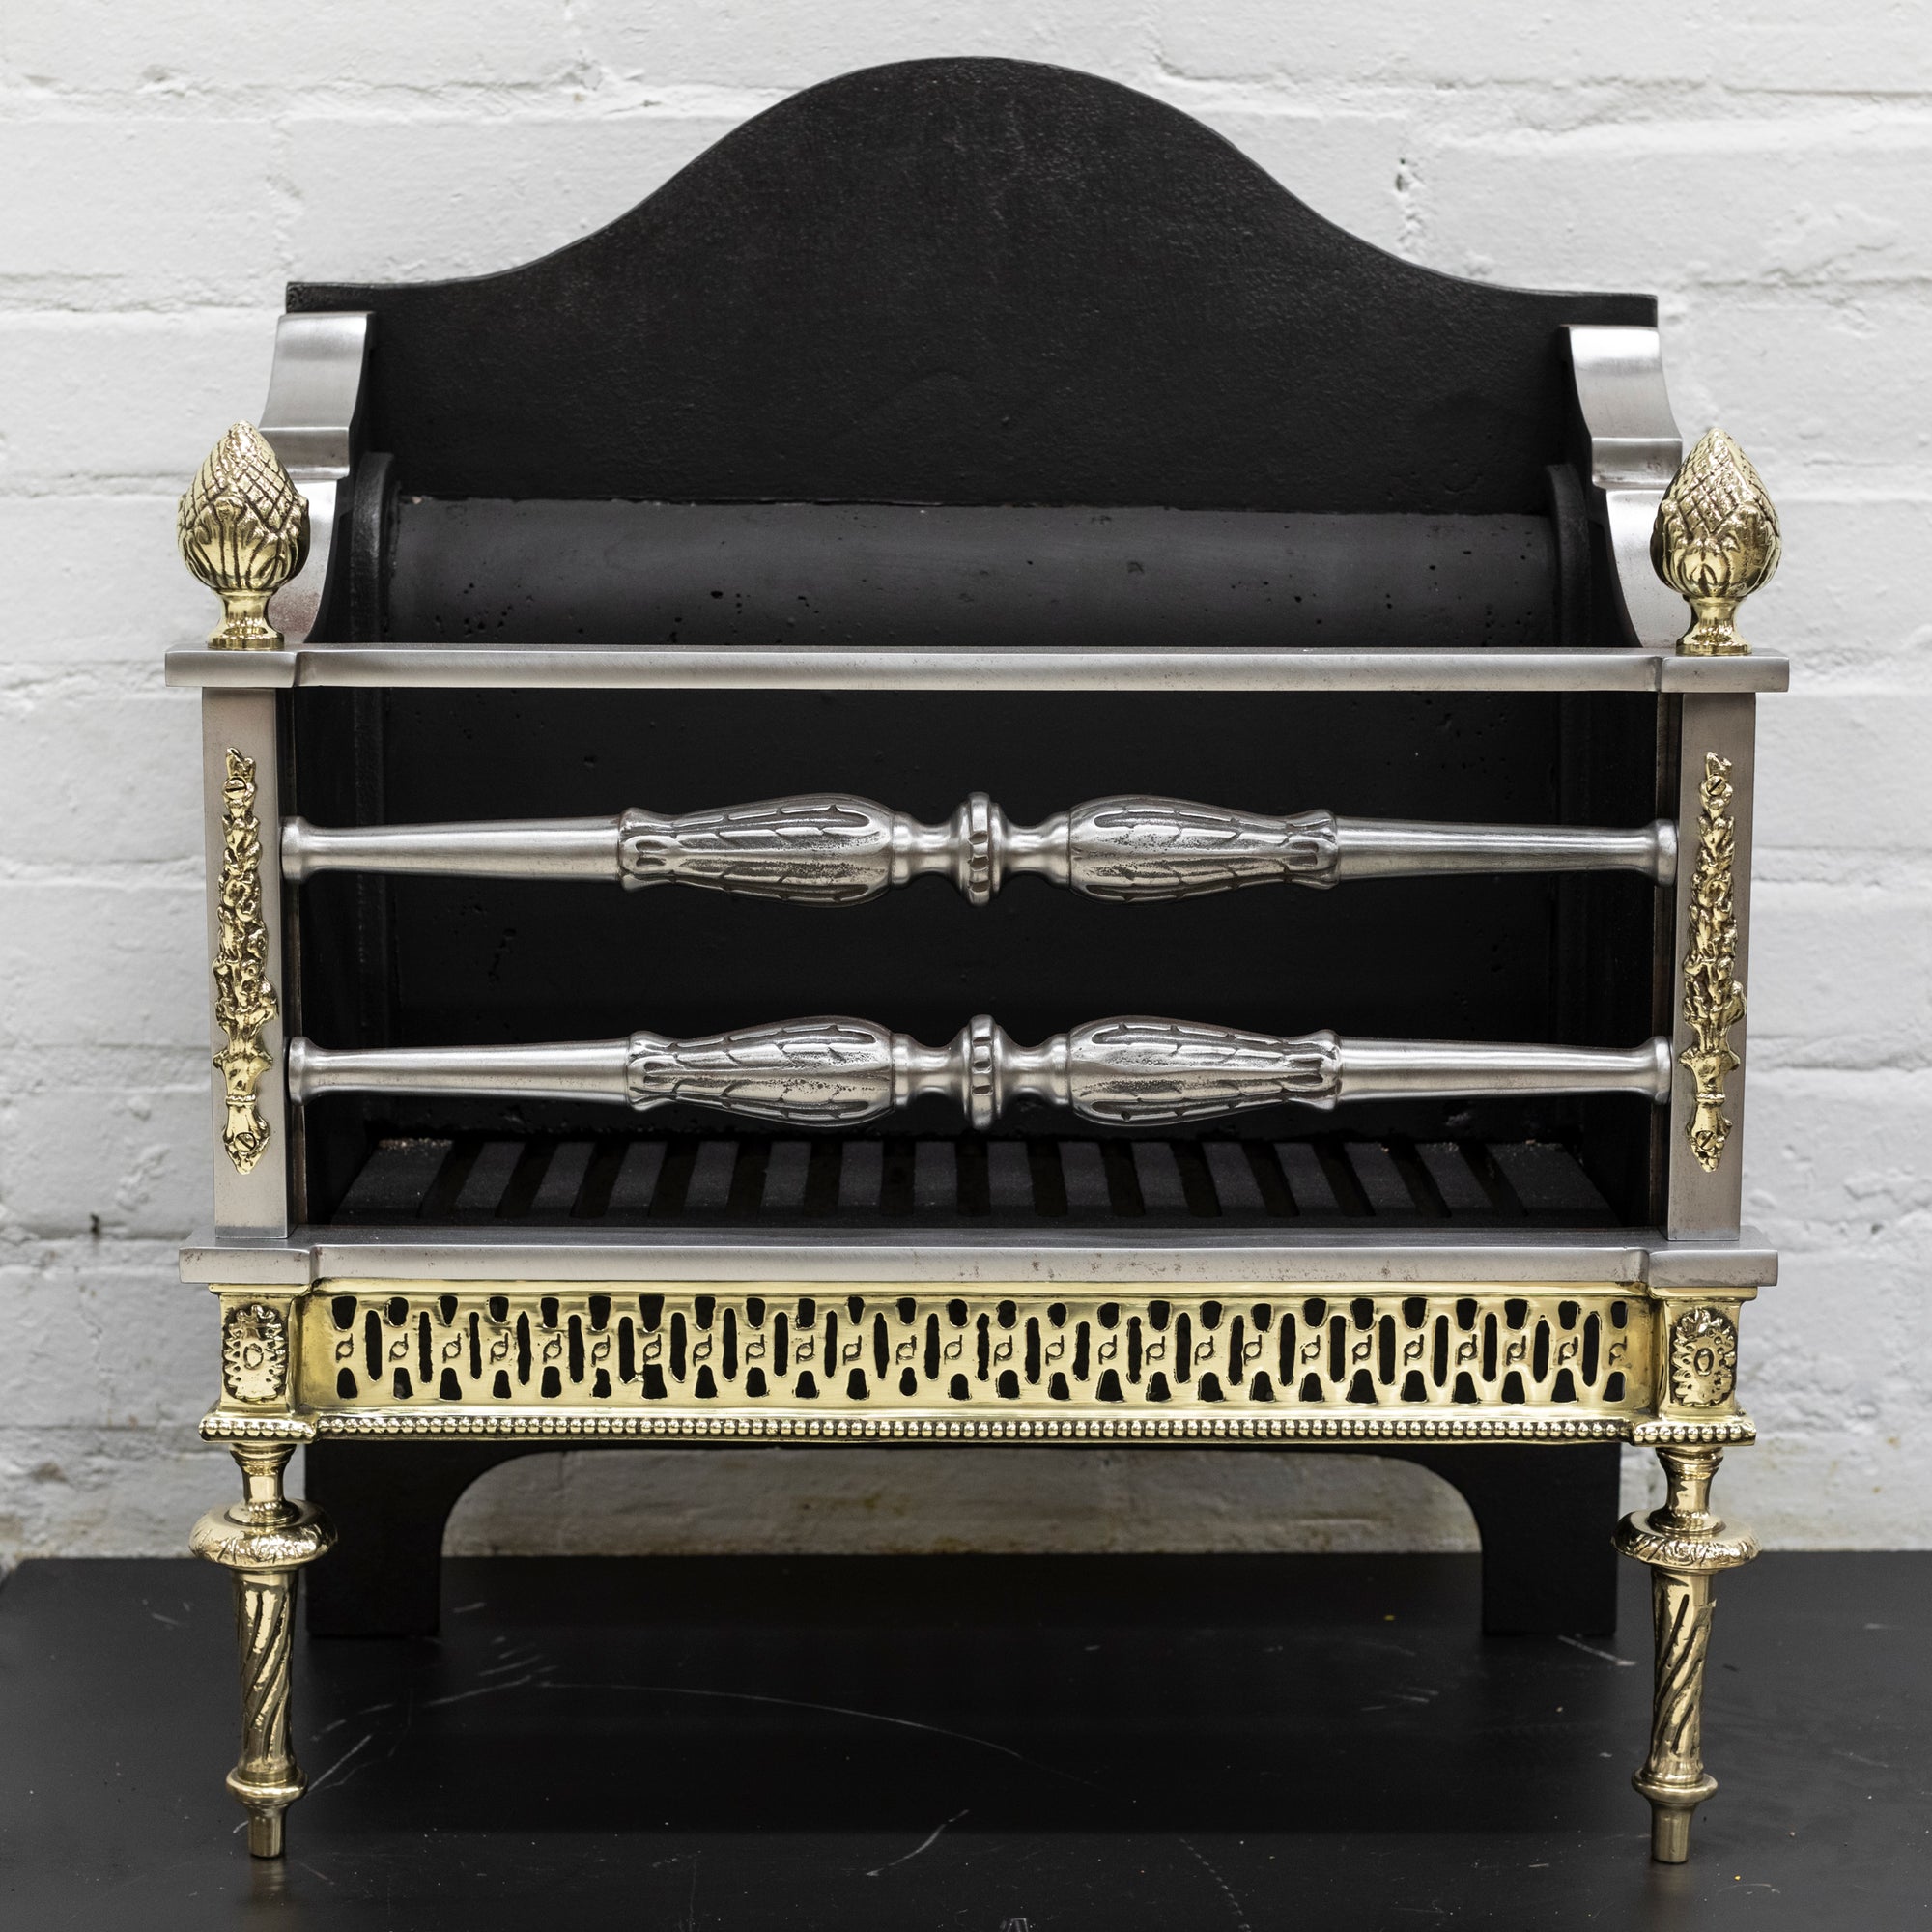 Antique Reclaimed Ornate Fire Basket With Acorn Finials | Pair Available | The Architectural Forum